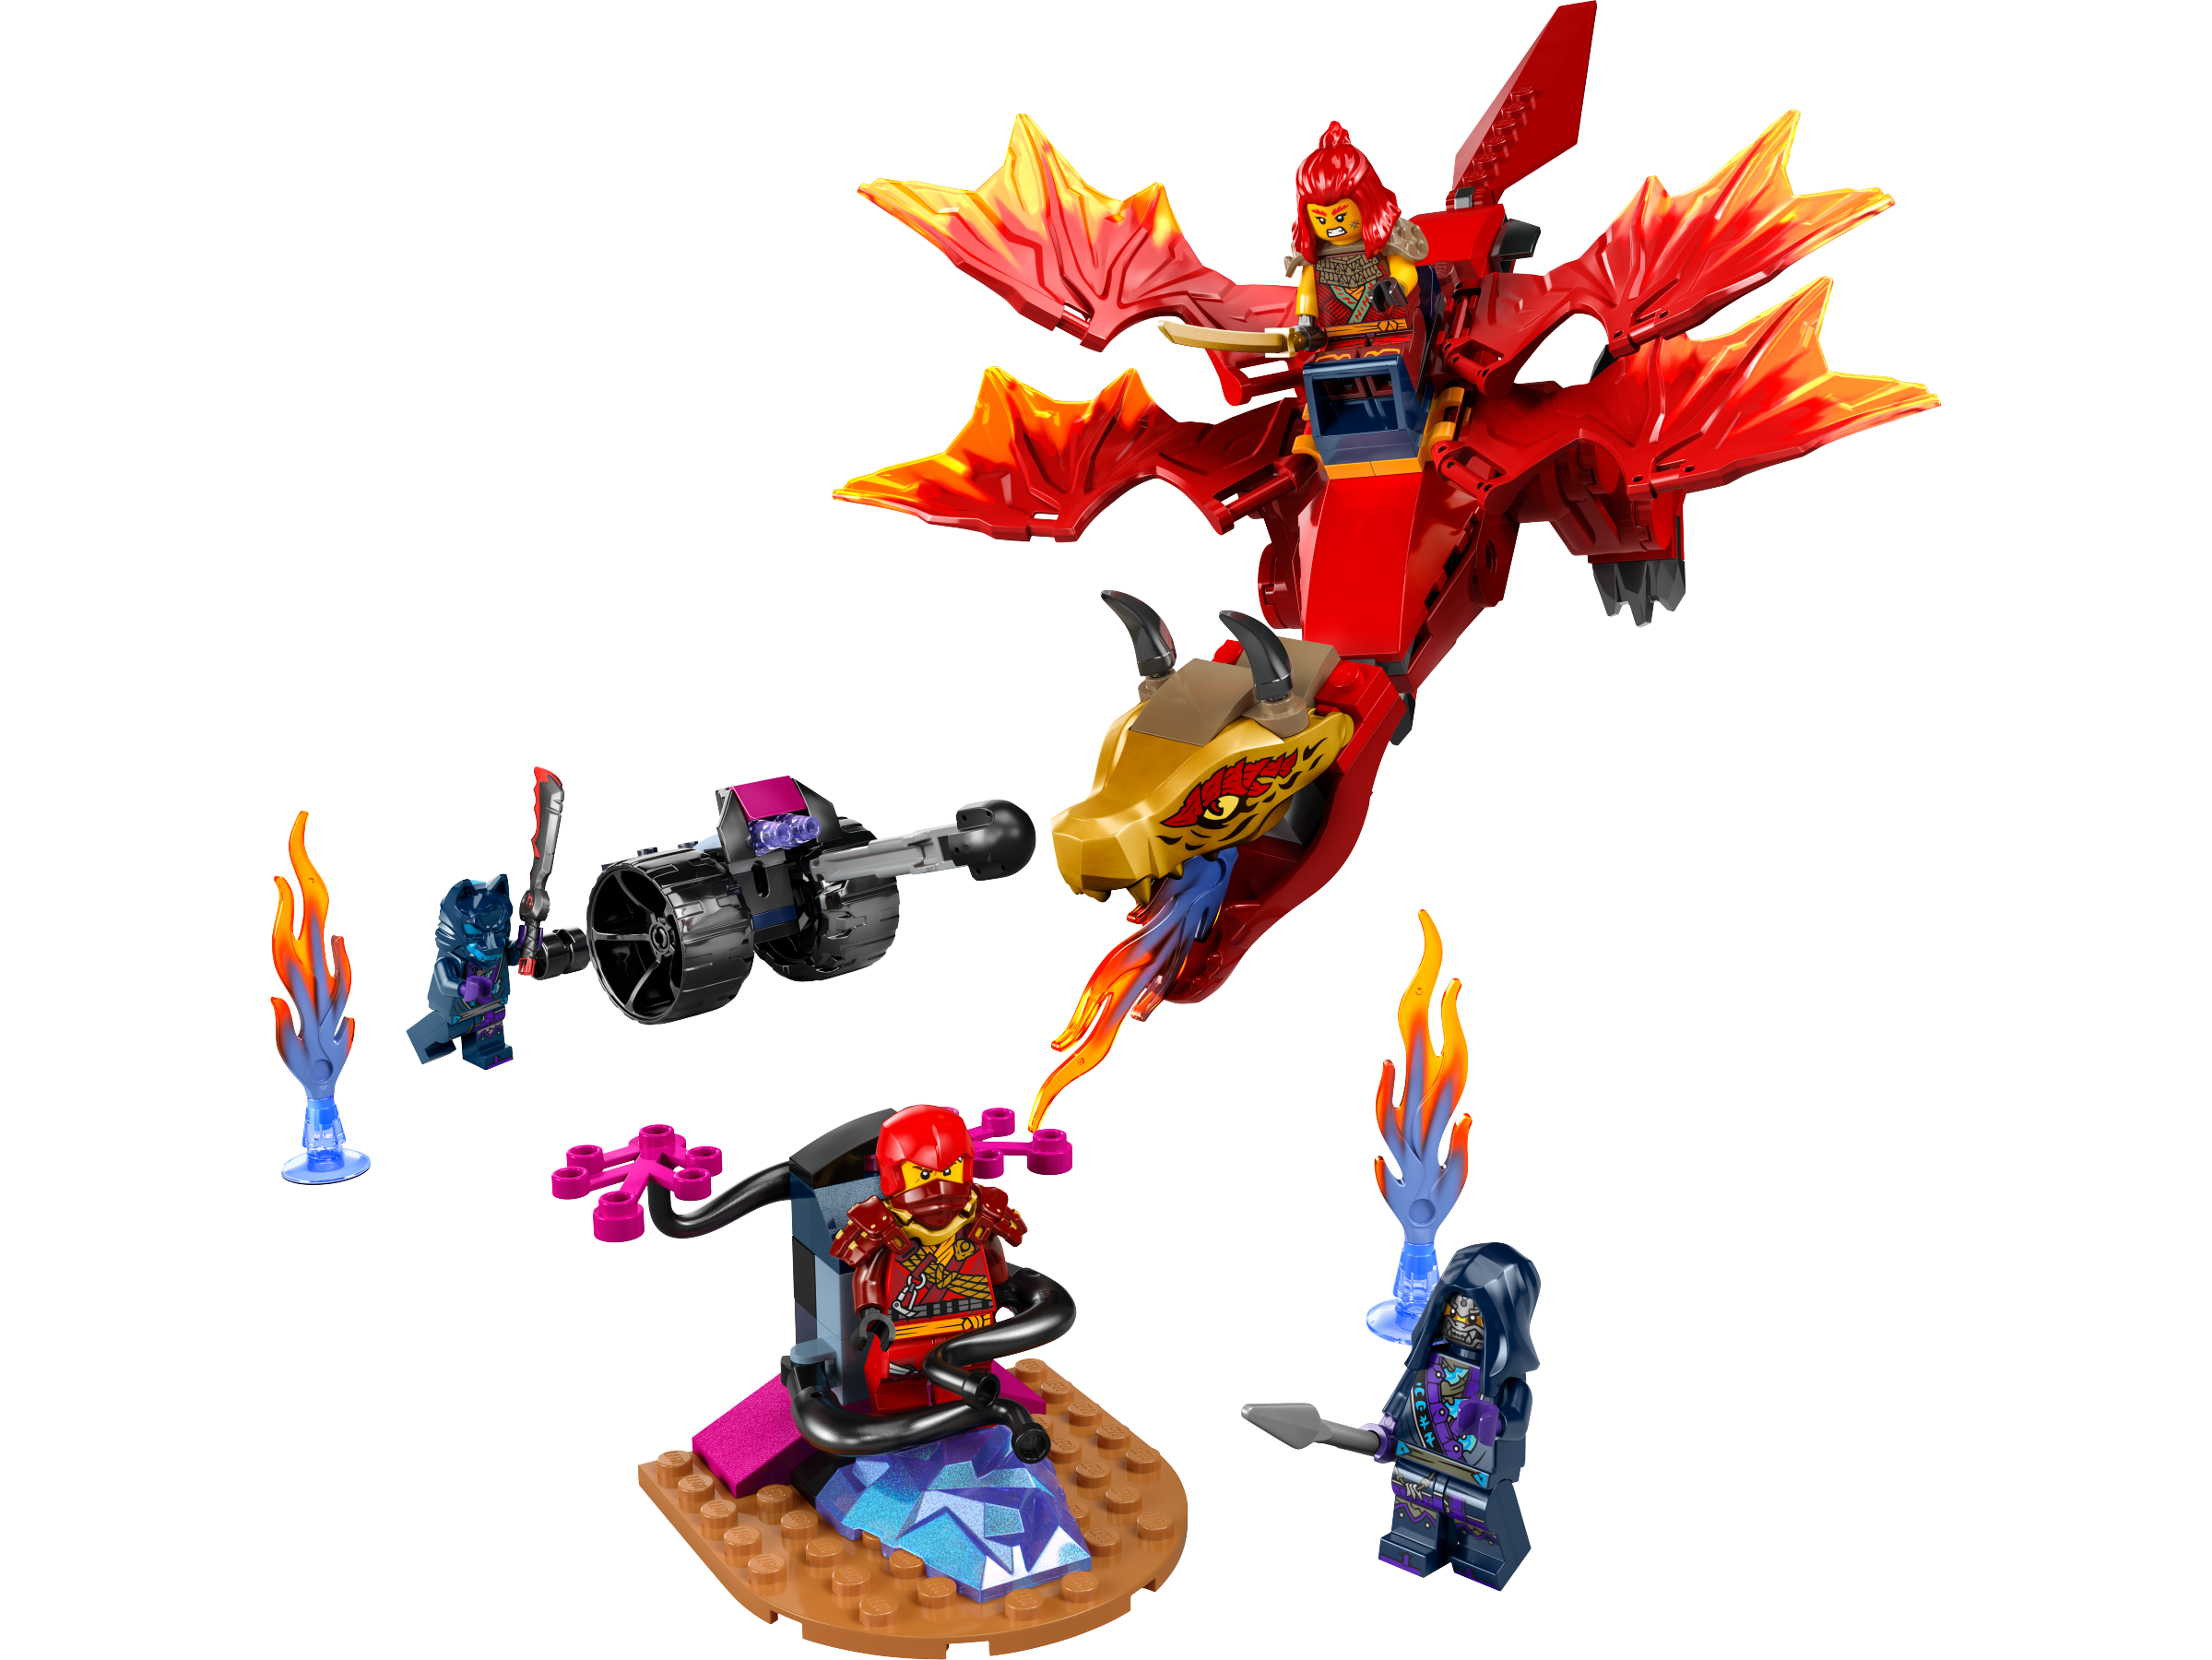 Huge LEGO® brick Dragon, Getting the dragon posed right was…